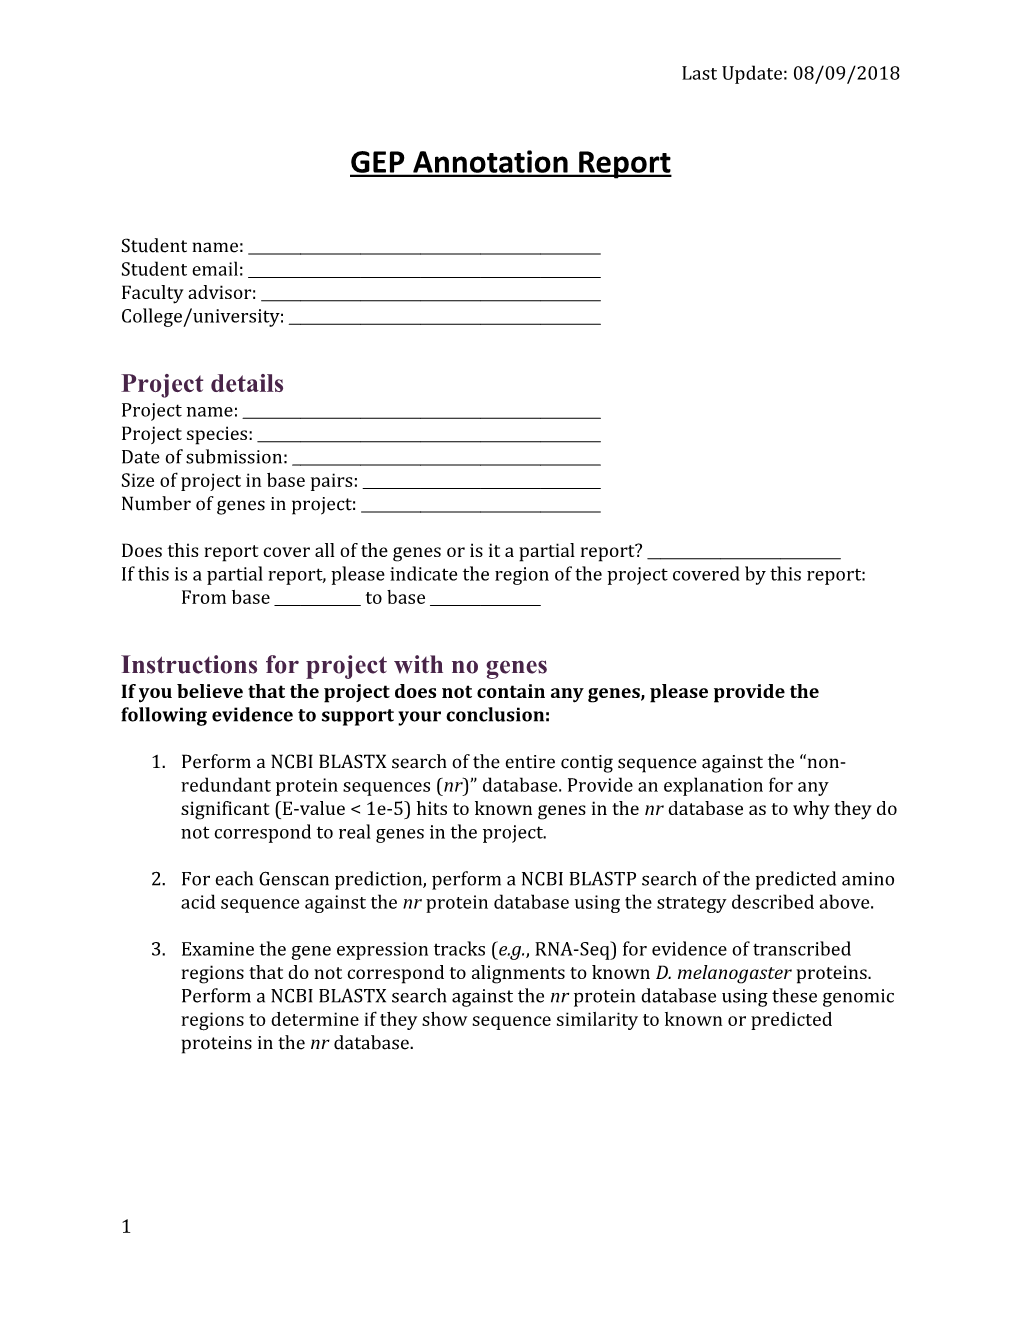 GEP Annotation Report